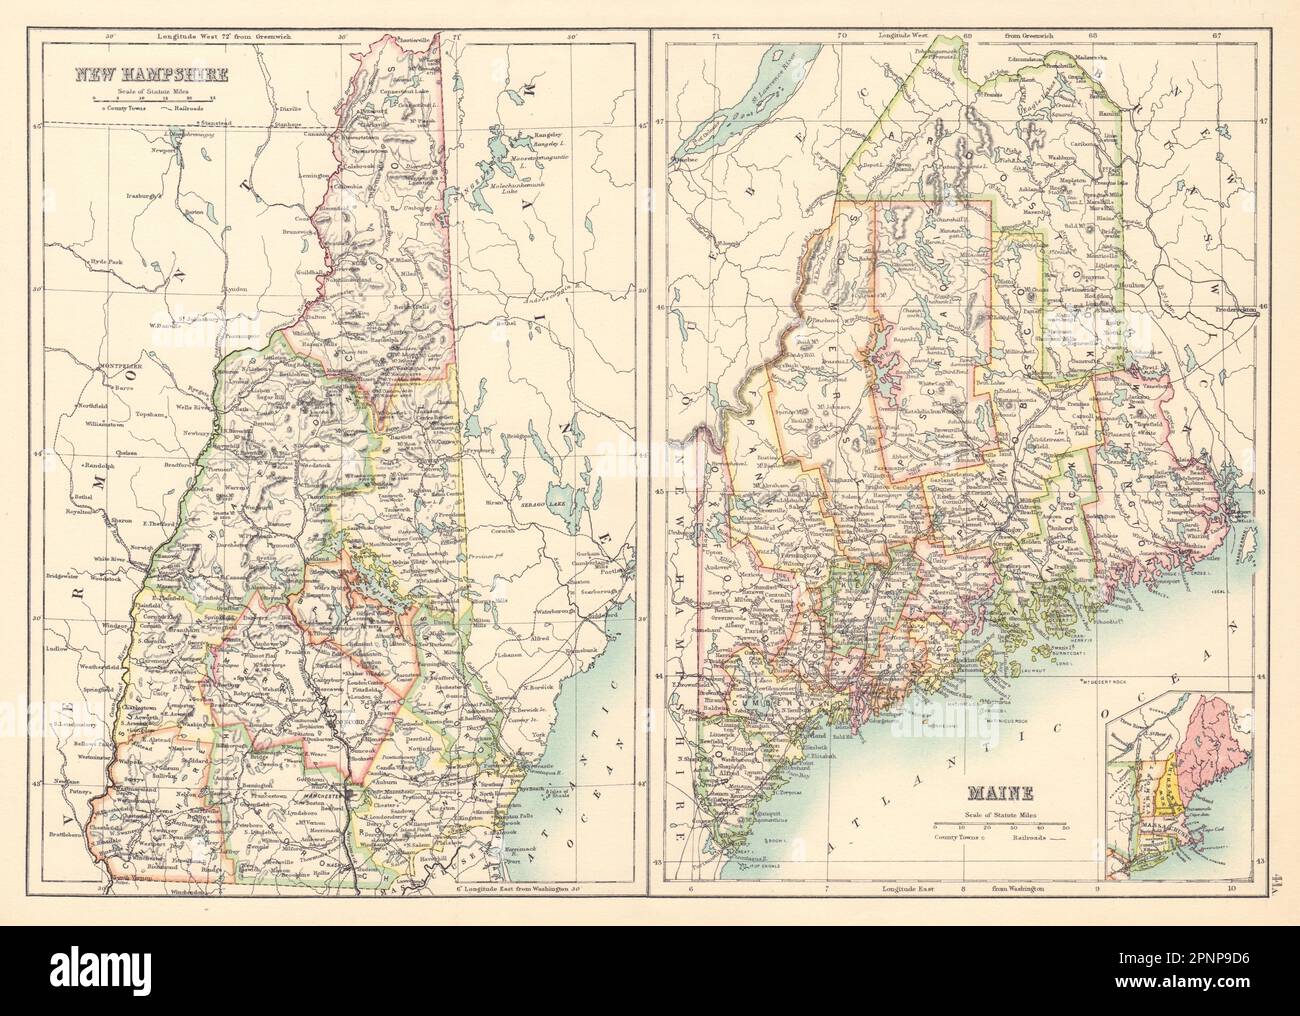 Maine and New Hampshire state maps showing counties. BARTHOLOMEW 1898 old Stock Photo